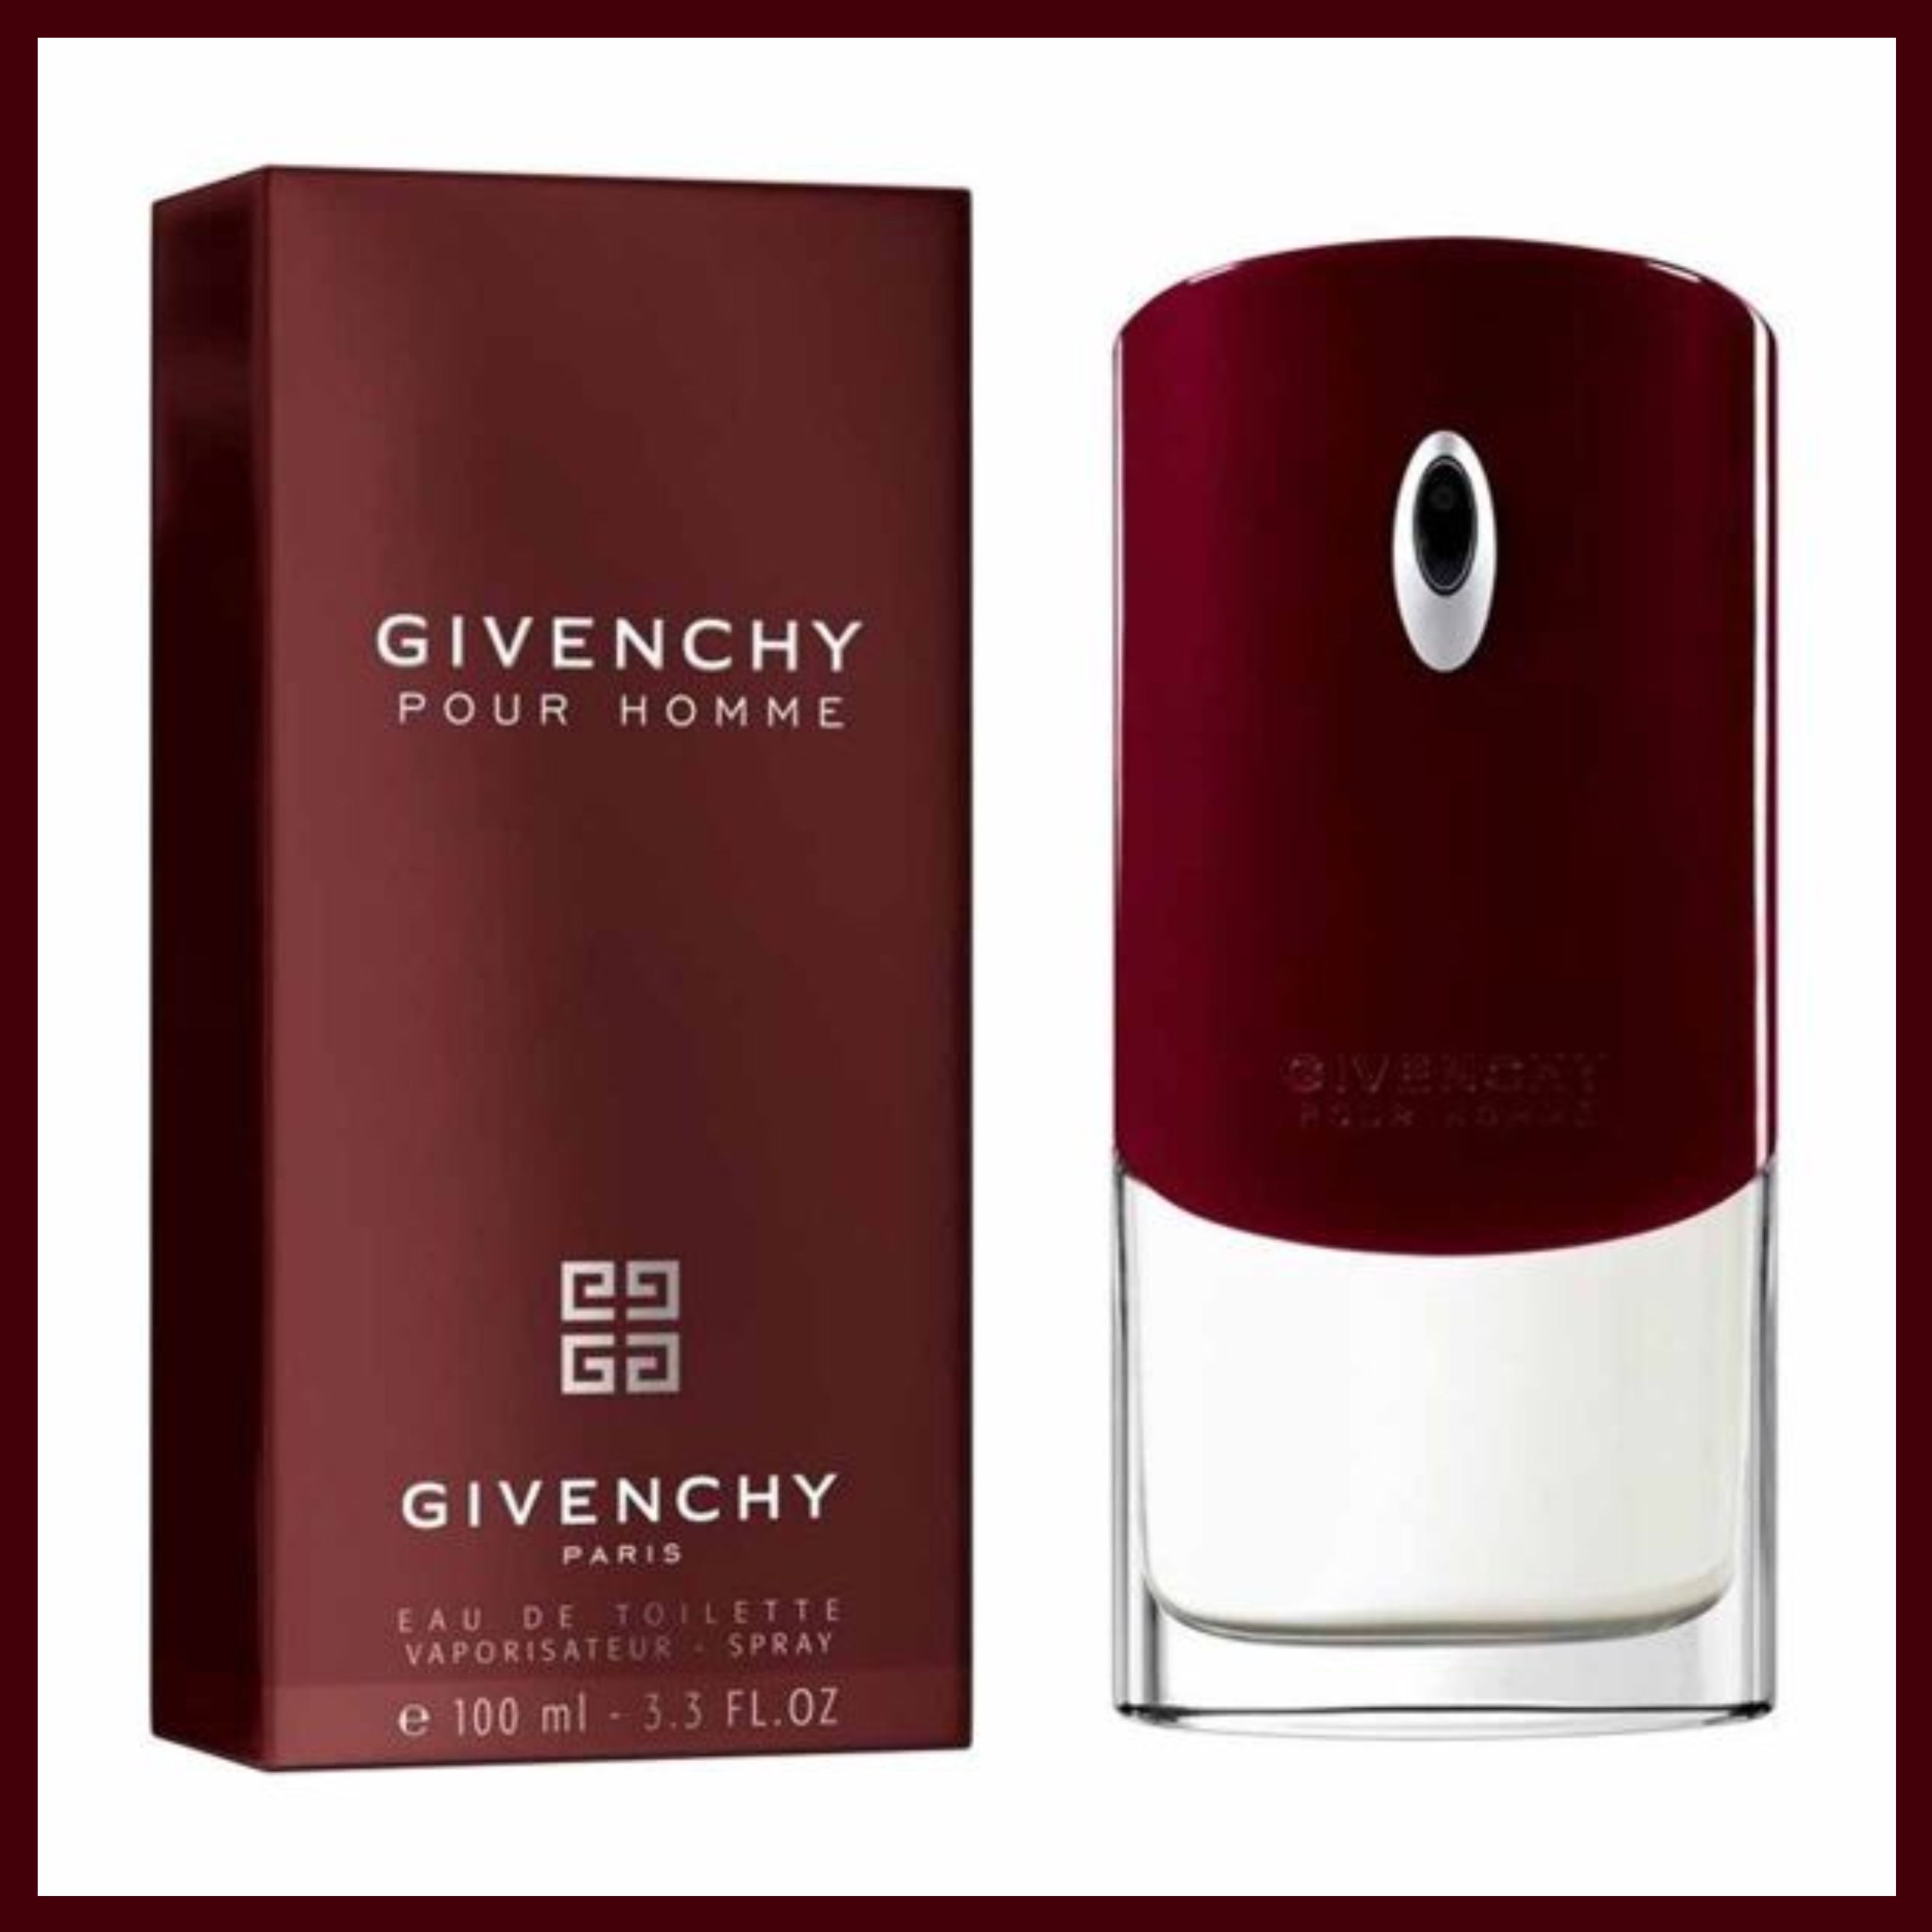 Живанши мужские летуаль. Givenchy "pour homme" EDT, 100ml. Givenchy pour homme men 100ml EDT 3274870303166. Givenchy pour homme Givenchy. Givenchy Givenchy pour homme, 100 ml.